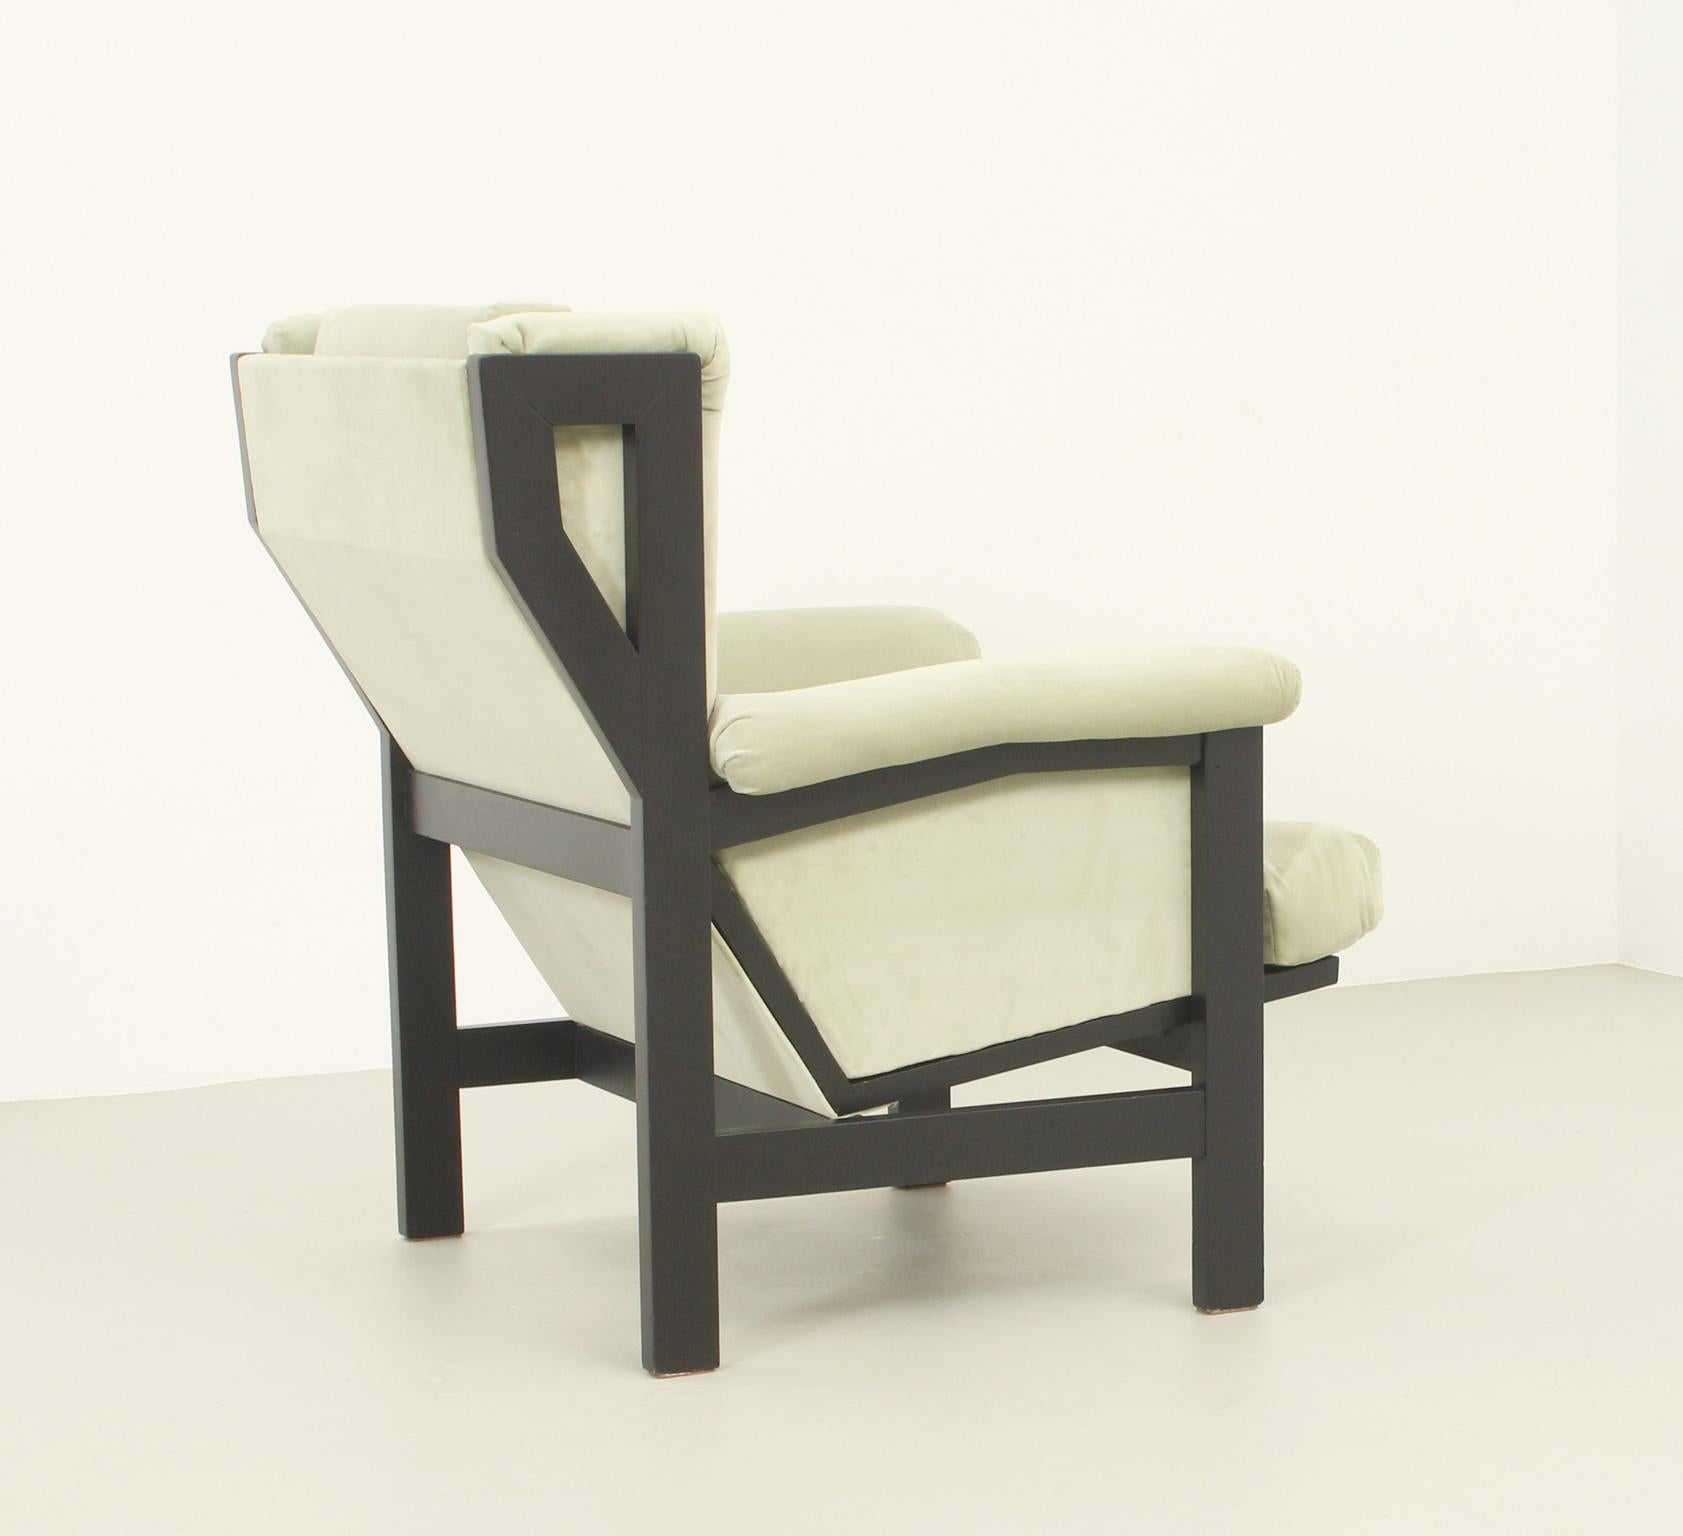 San Remo armchair designed in 1959 by Rafael Carreras for MYC-Gavina, Spain. Black lacquered beech wood structure and new upholstery in velvet fabric.